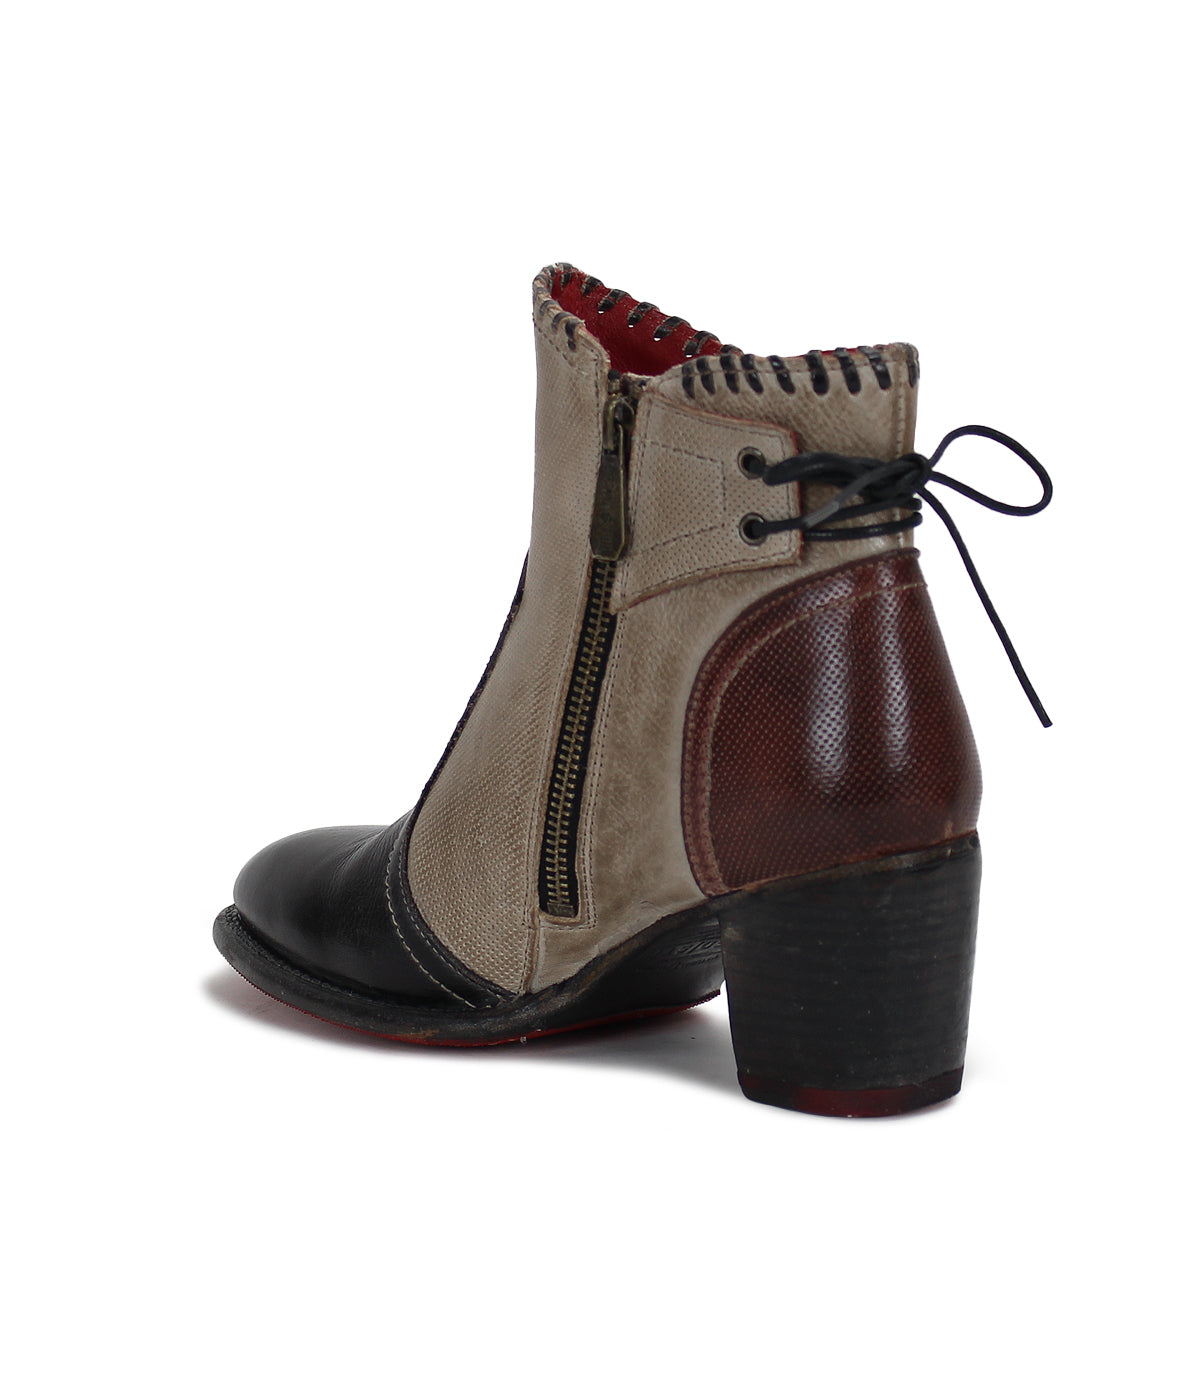 A women's Bia ankle boot with a zipper on the side, made by Bed Stu.